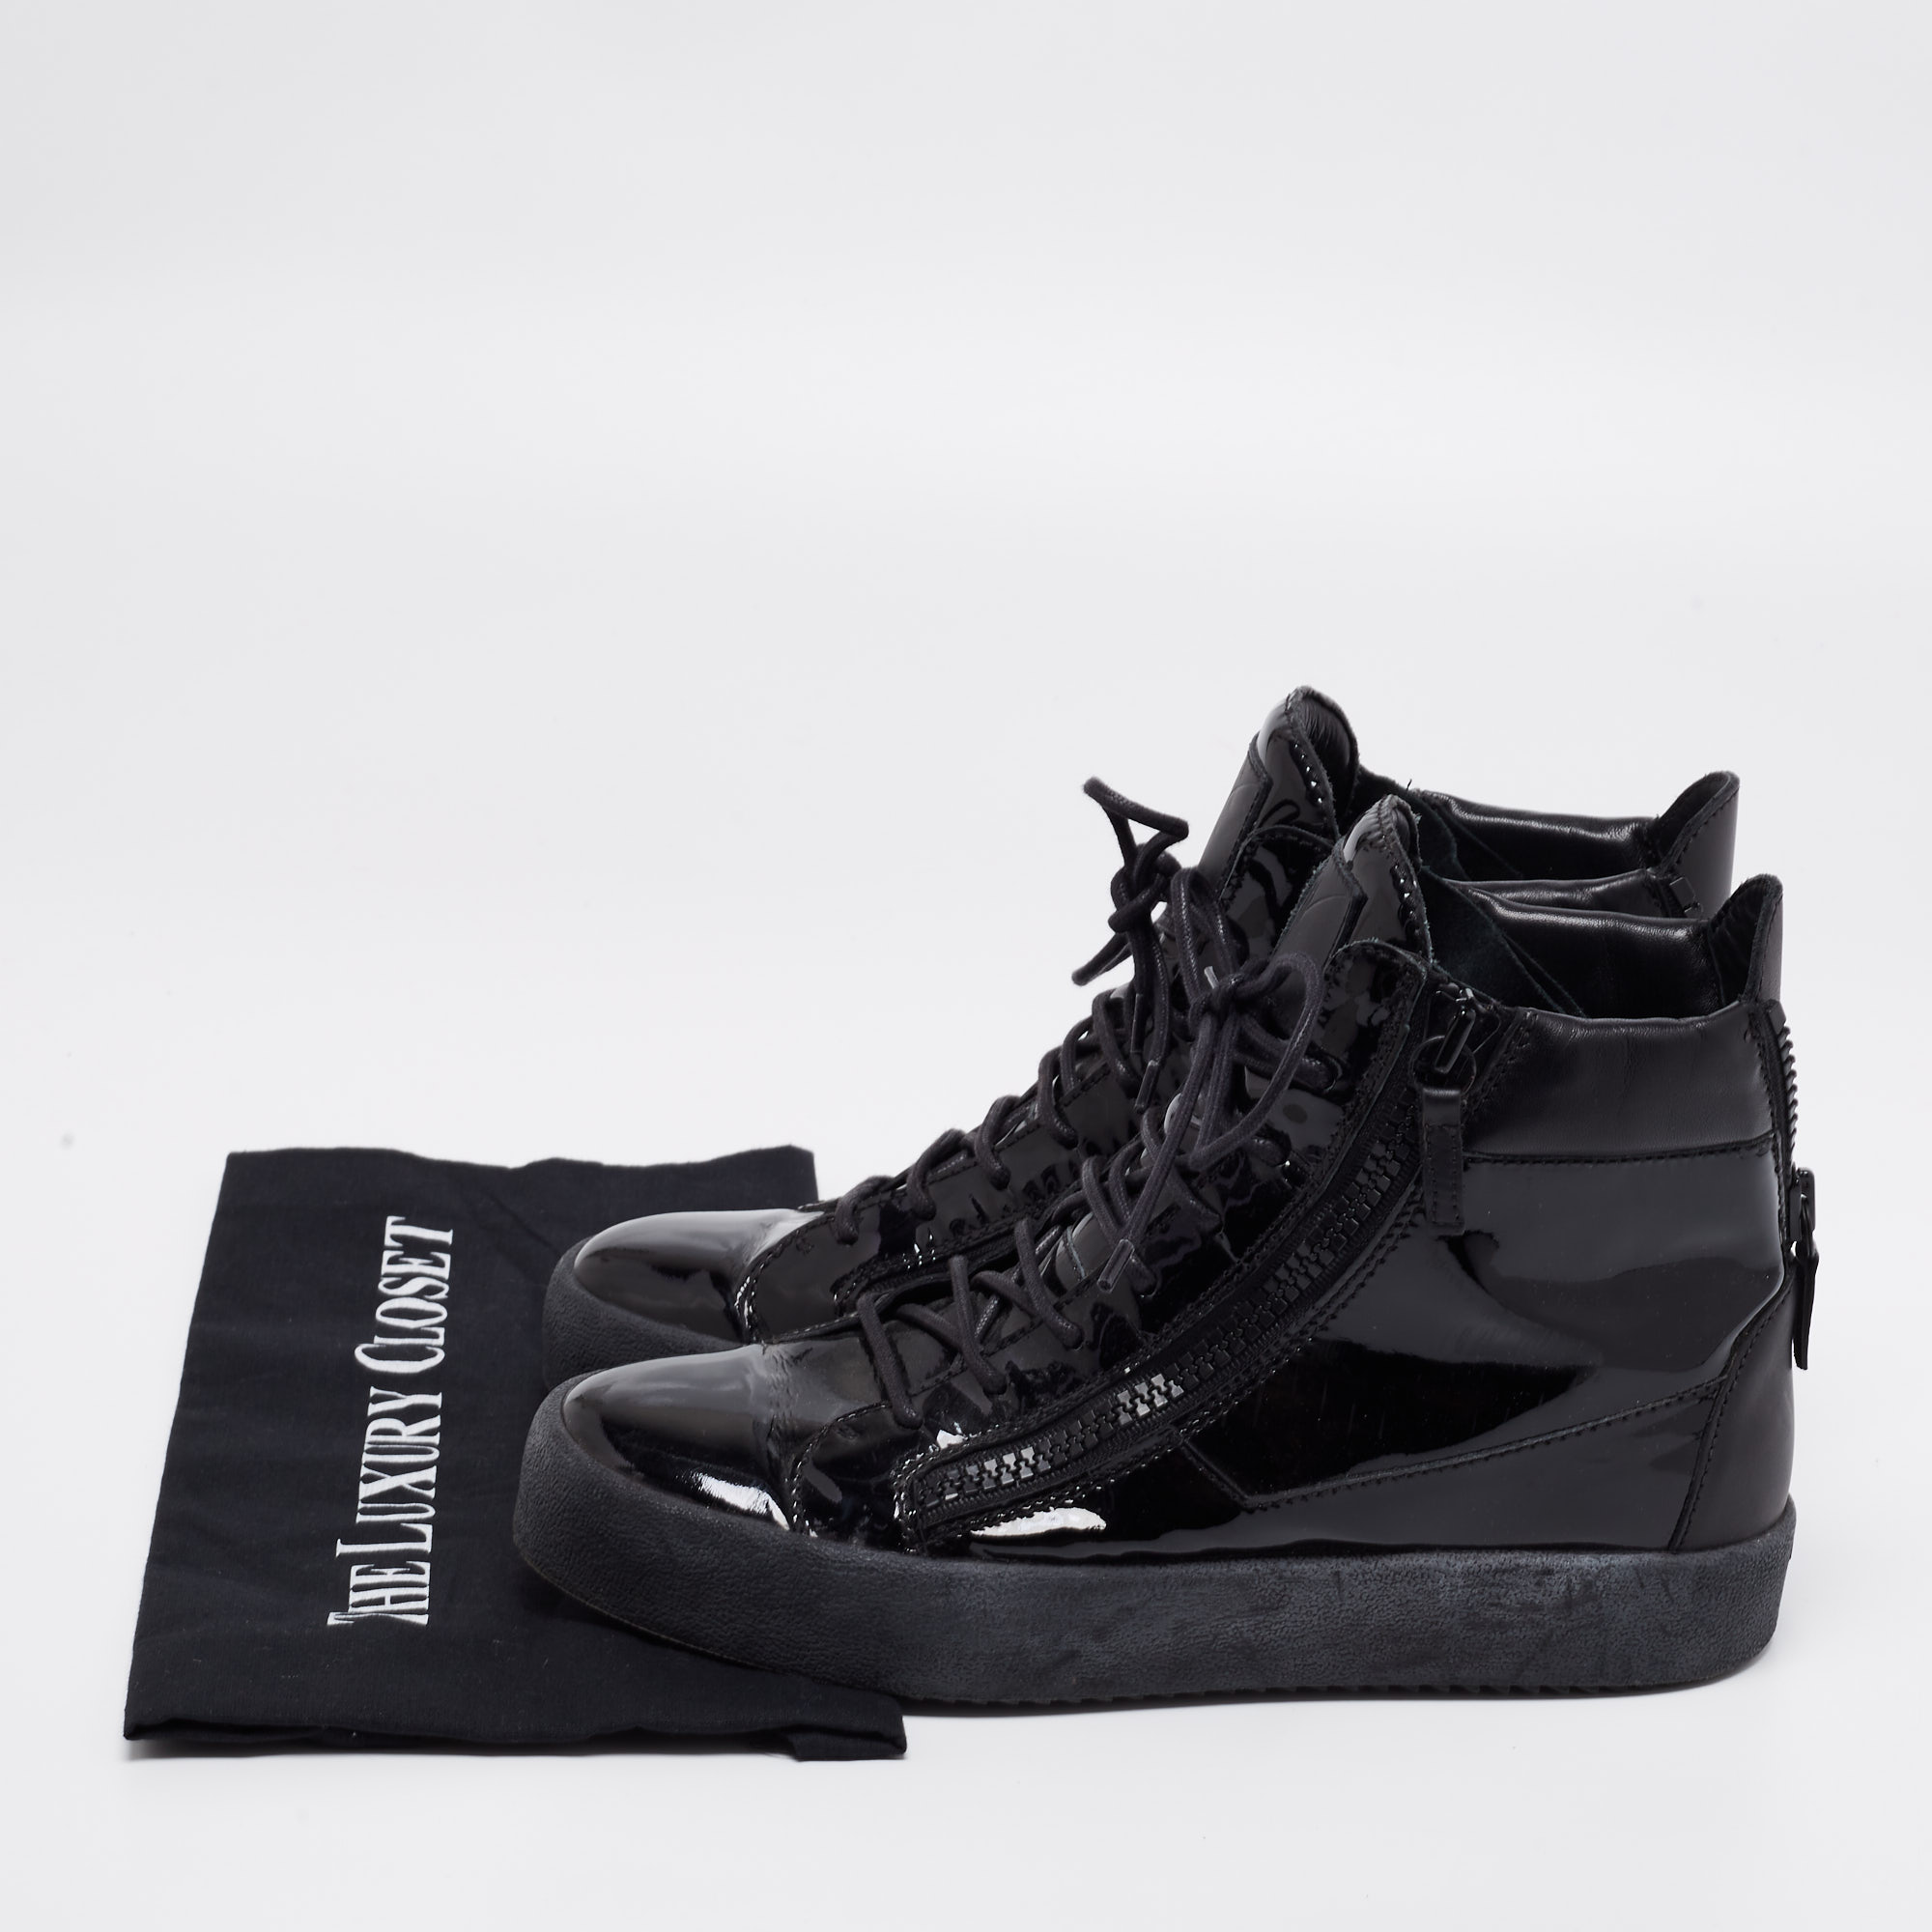 Giuseppe Zanotti Black Leather And Patent Double Zipper High Top Sneakers Size 41